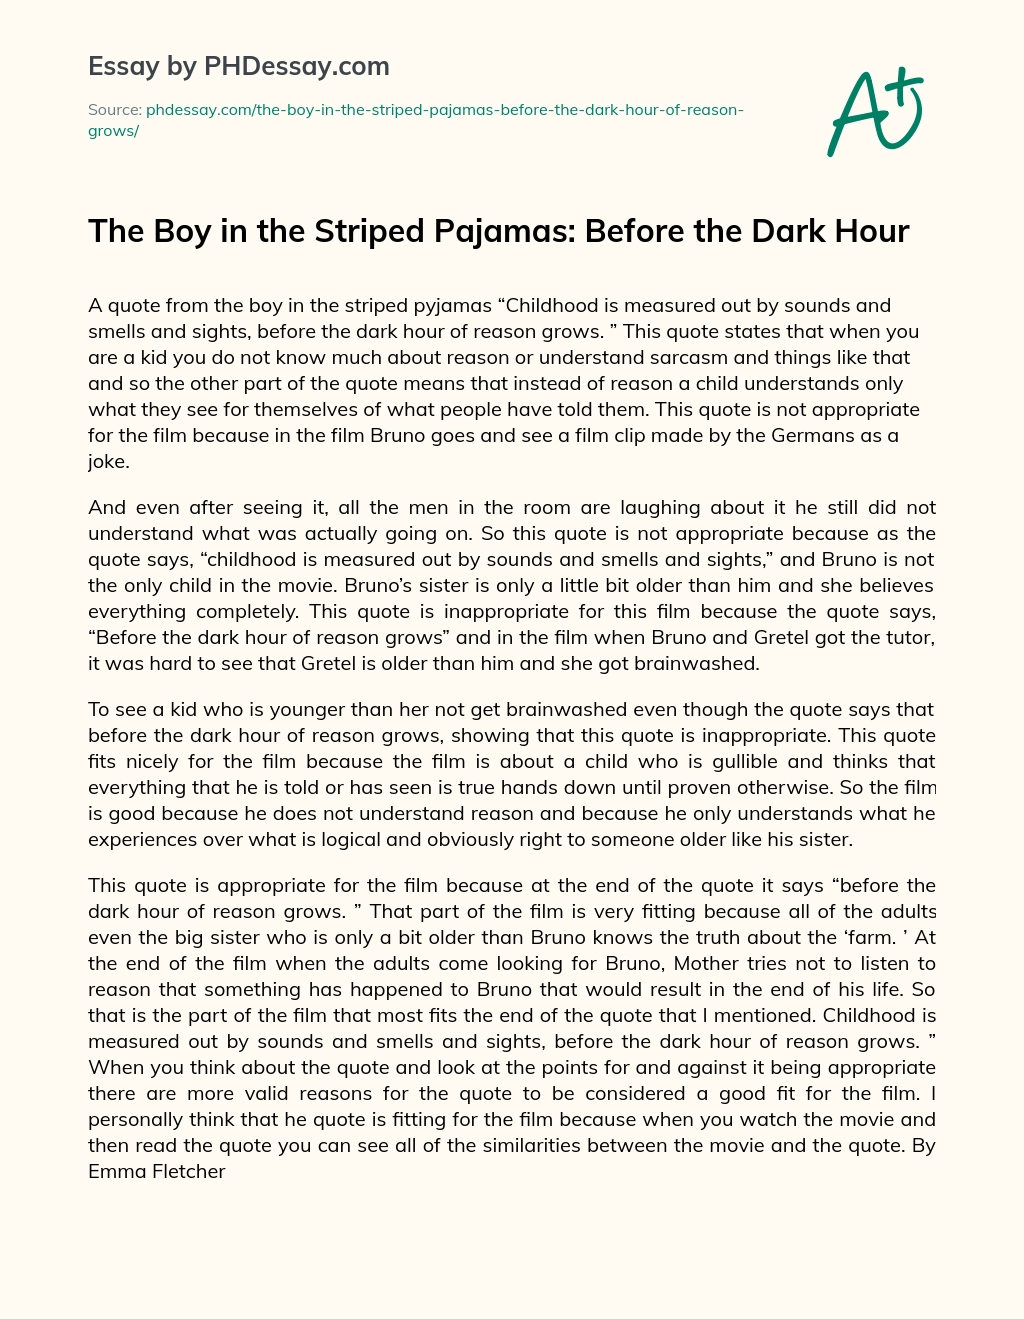 The Boy in the Striped Pajamas: Before the Dark Hour essay